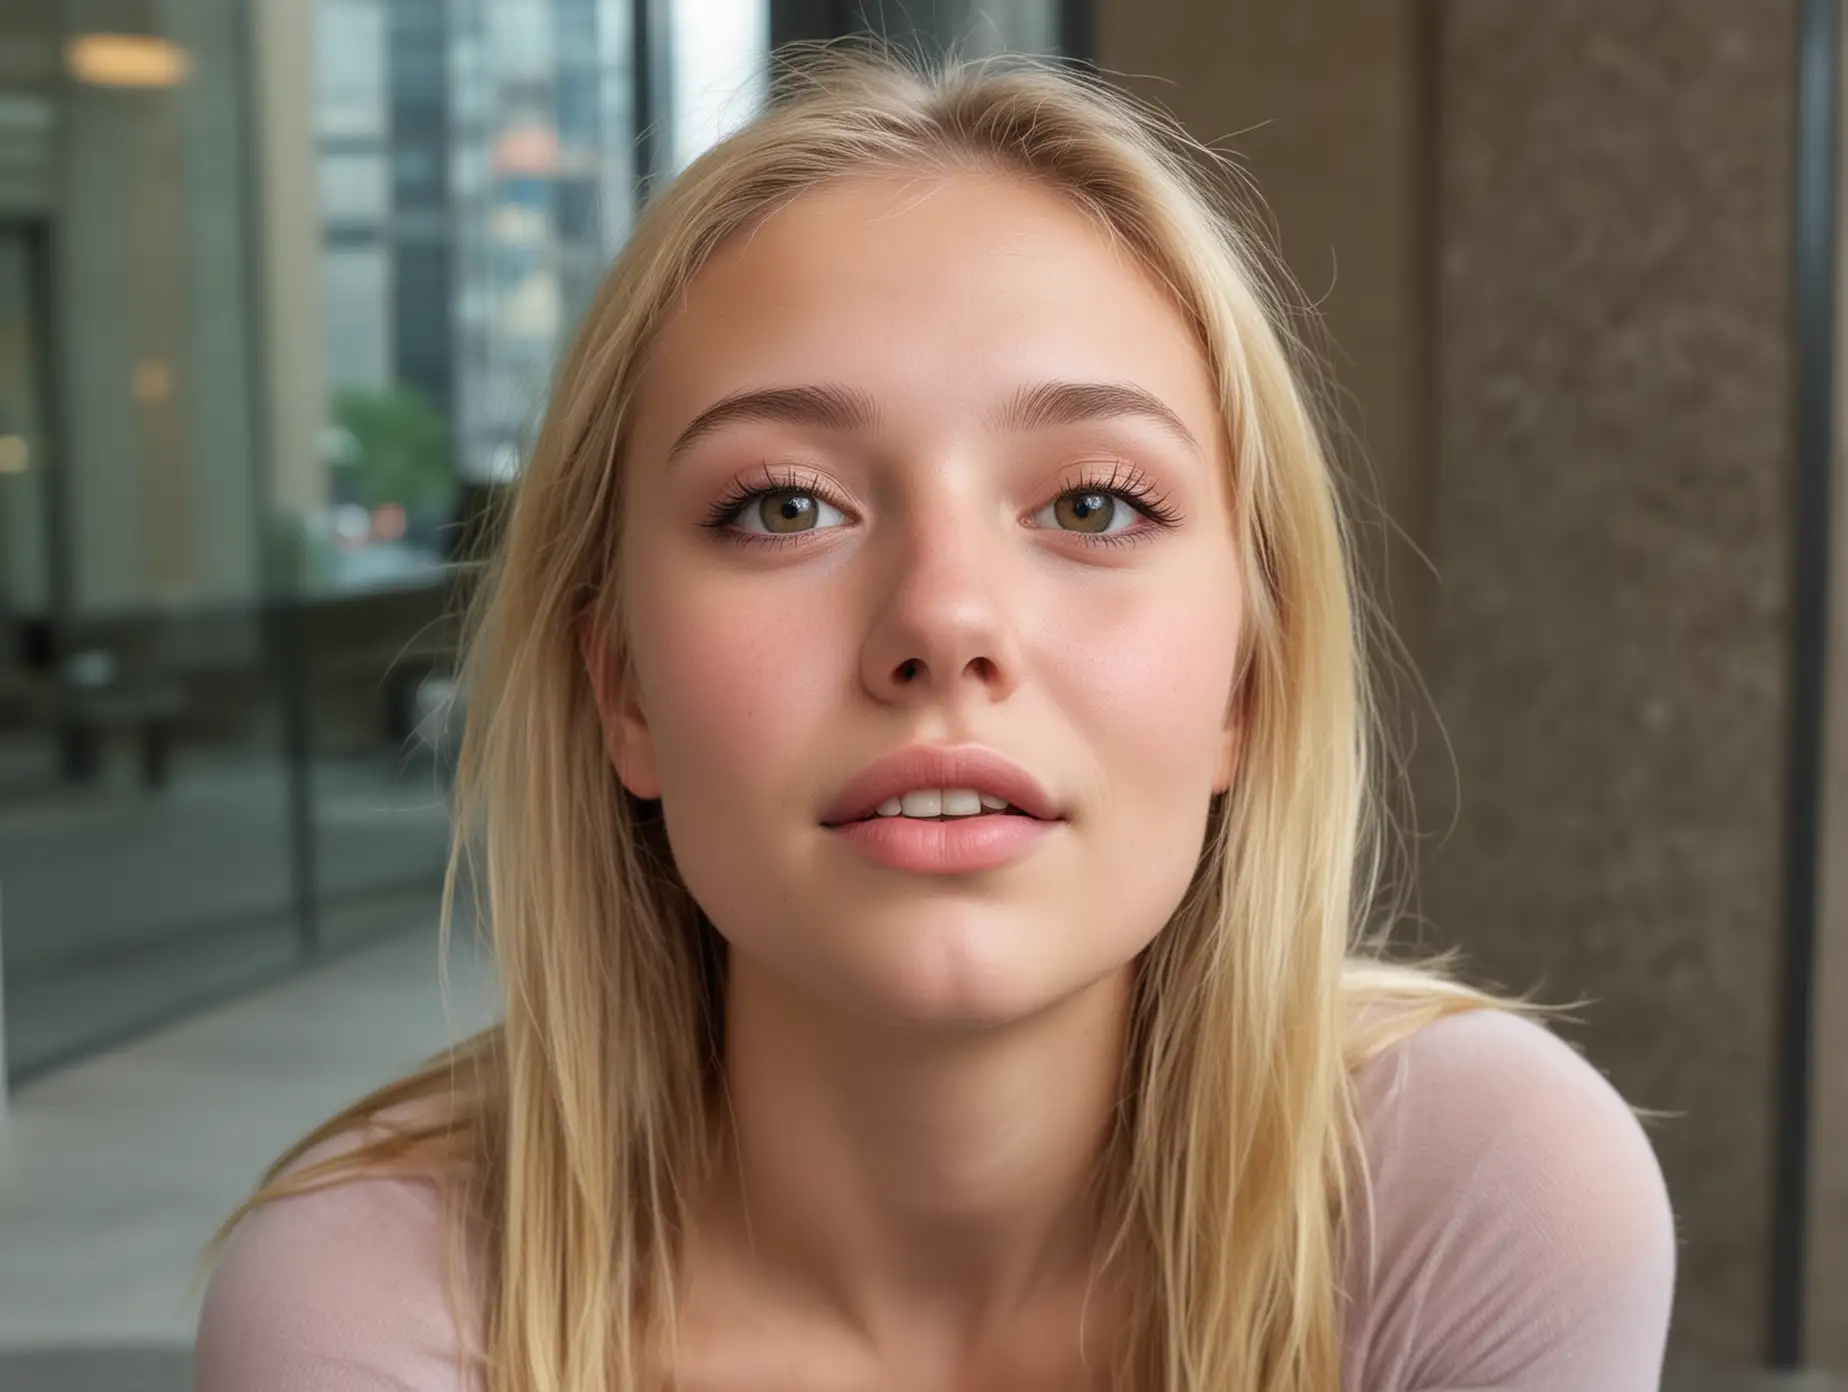 Face of a petite sweet blond 20 year old model with a perky little nose blushing and looking up in wonder at the camera from where she's sitting in the entry lobby of a high-rise office building.